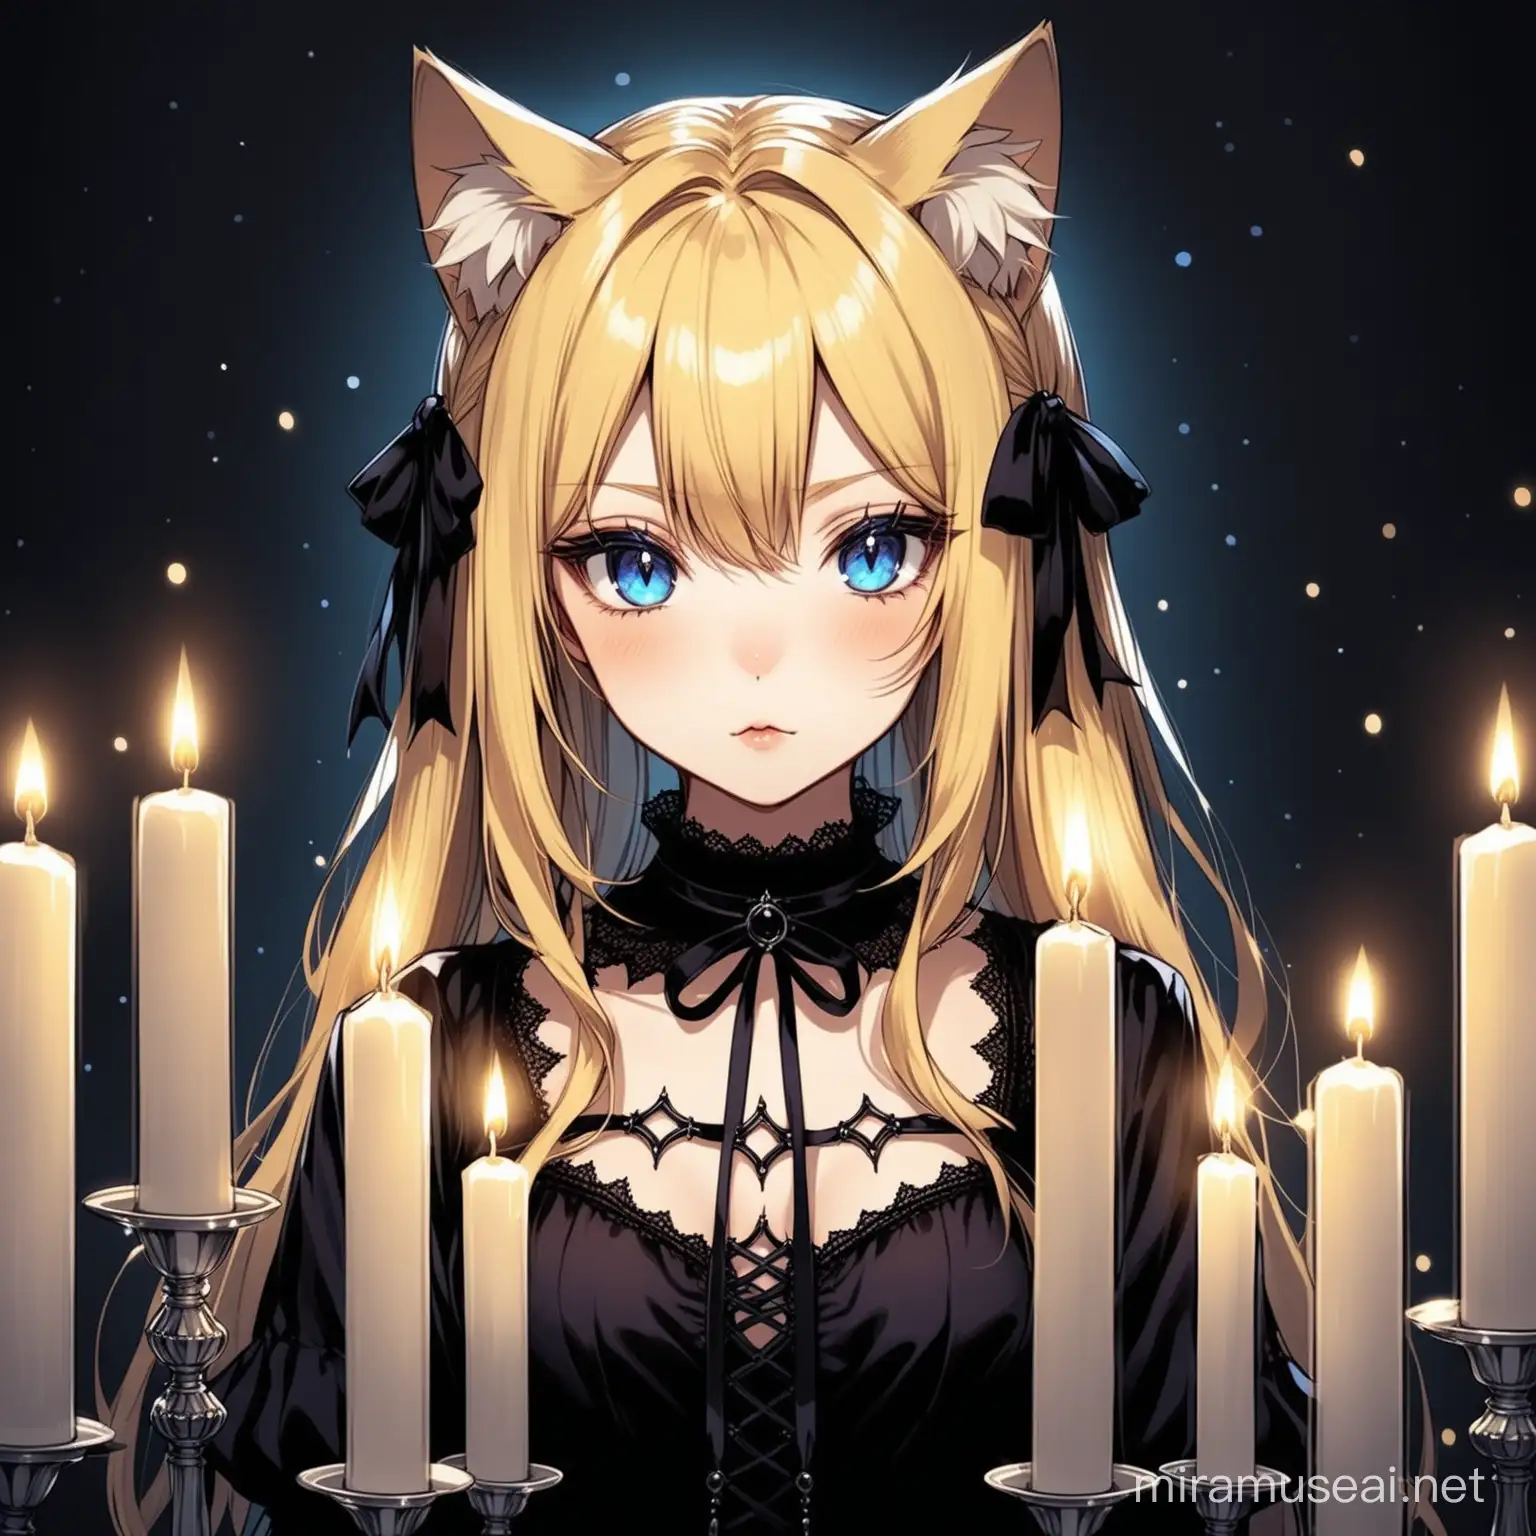 Gothic Blonde Woman with Dark Blue Eyes and Cat Ears Surrounded by Candles